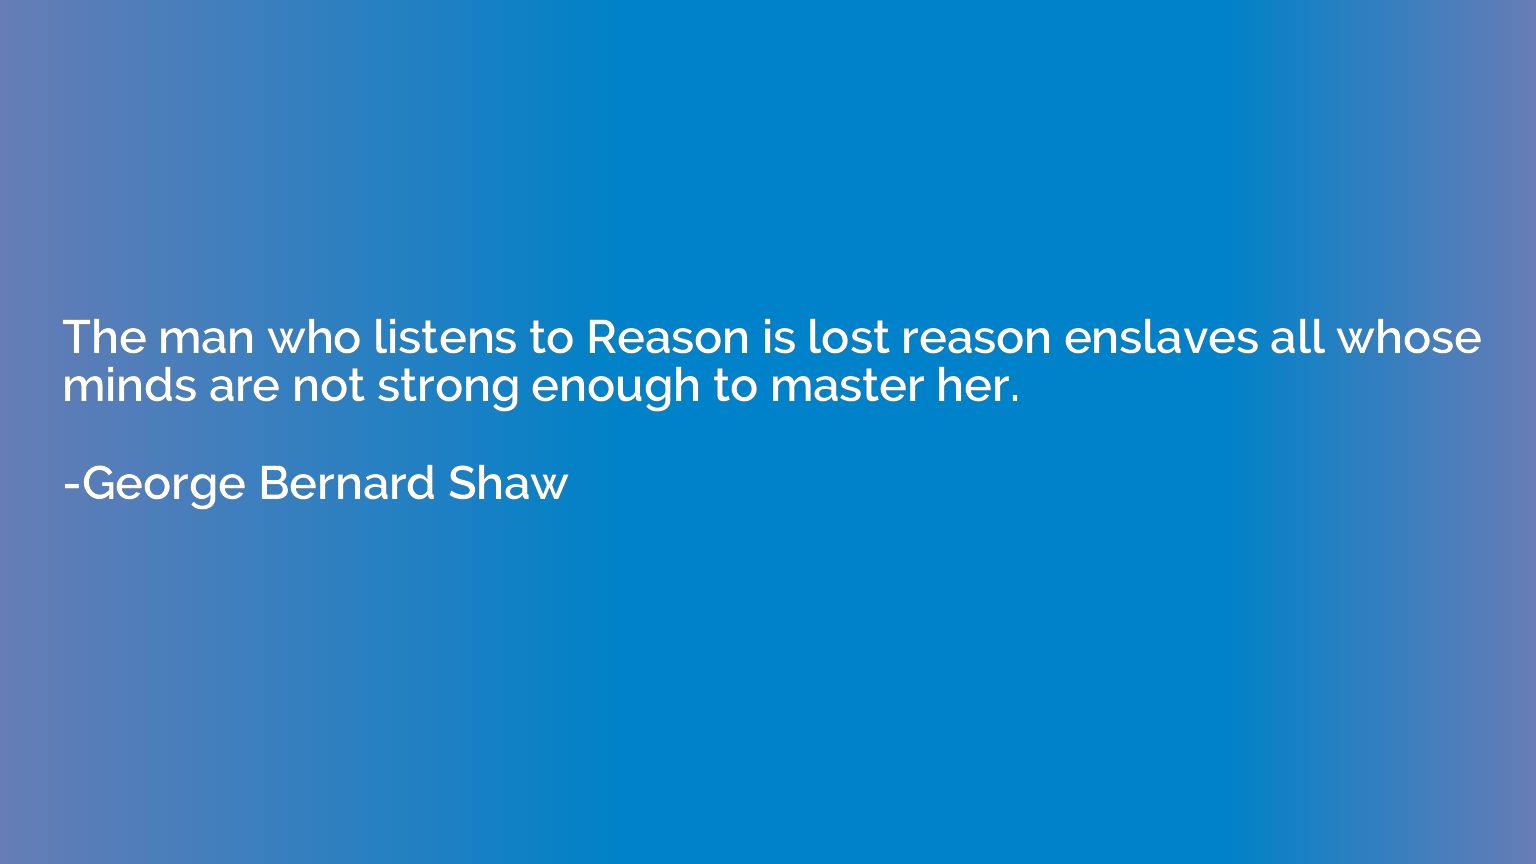 The man who listens to Reason is lost reason enslaves all wh